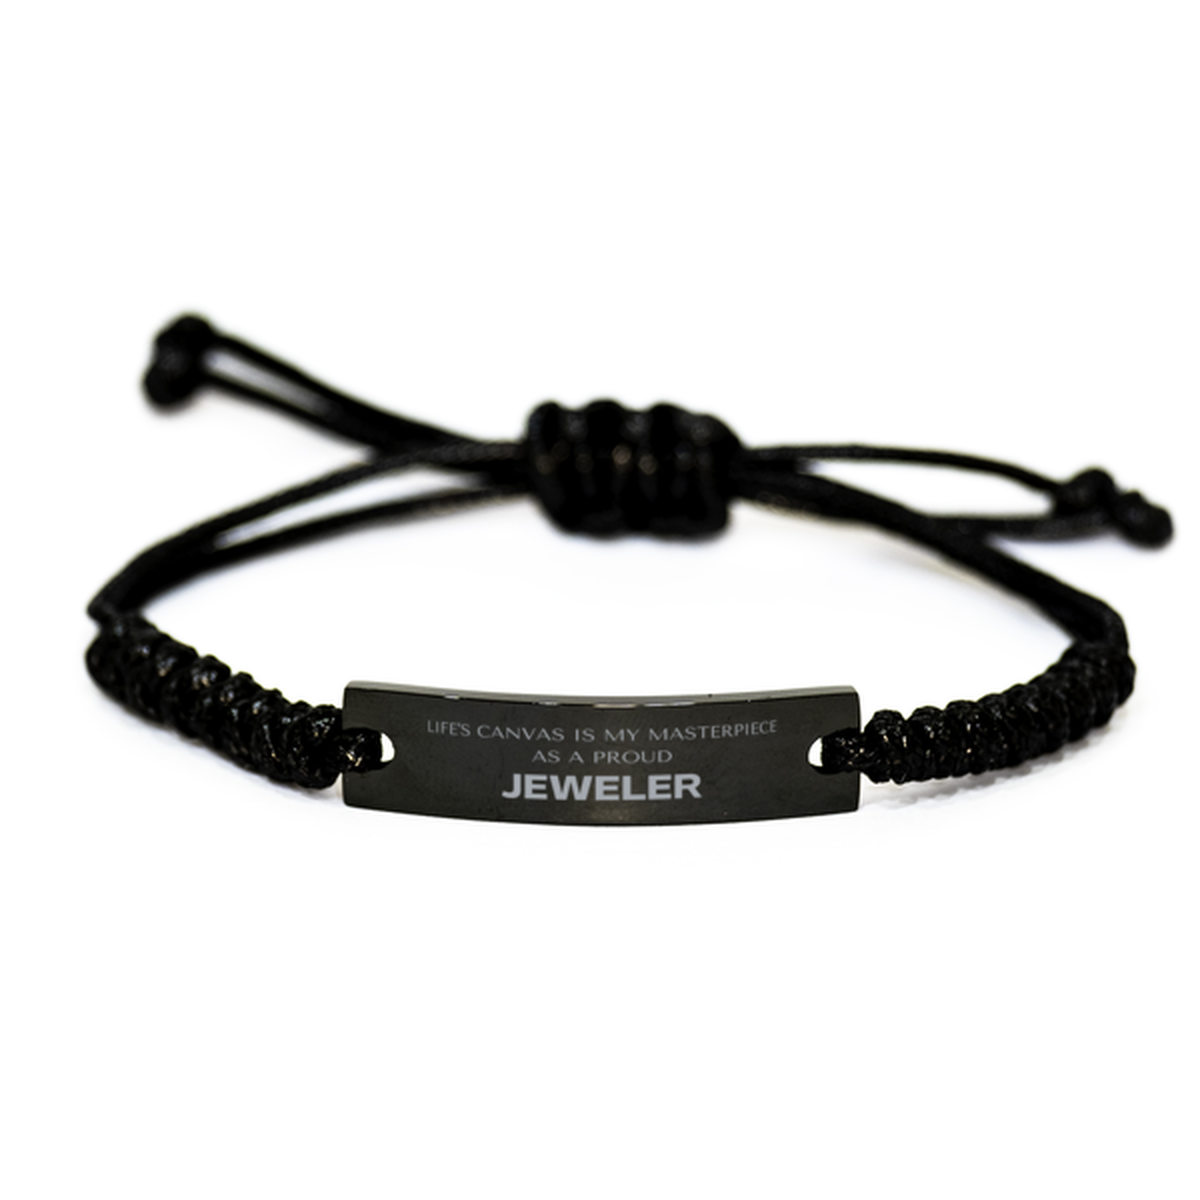 Proud Jeweler Gifts, Life's canvas is my masterpiece, Epic Birthday Christmas Unique Black Rope Bracelet For Jeweler, Coworkers, Men, Women, Friends